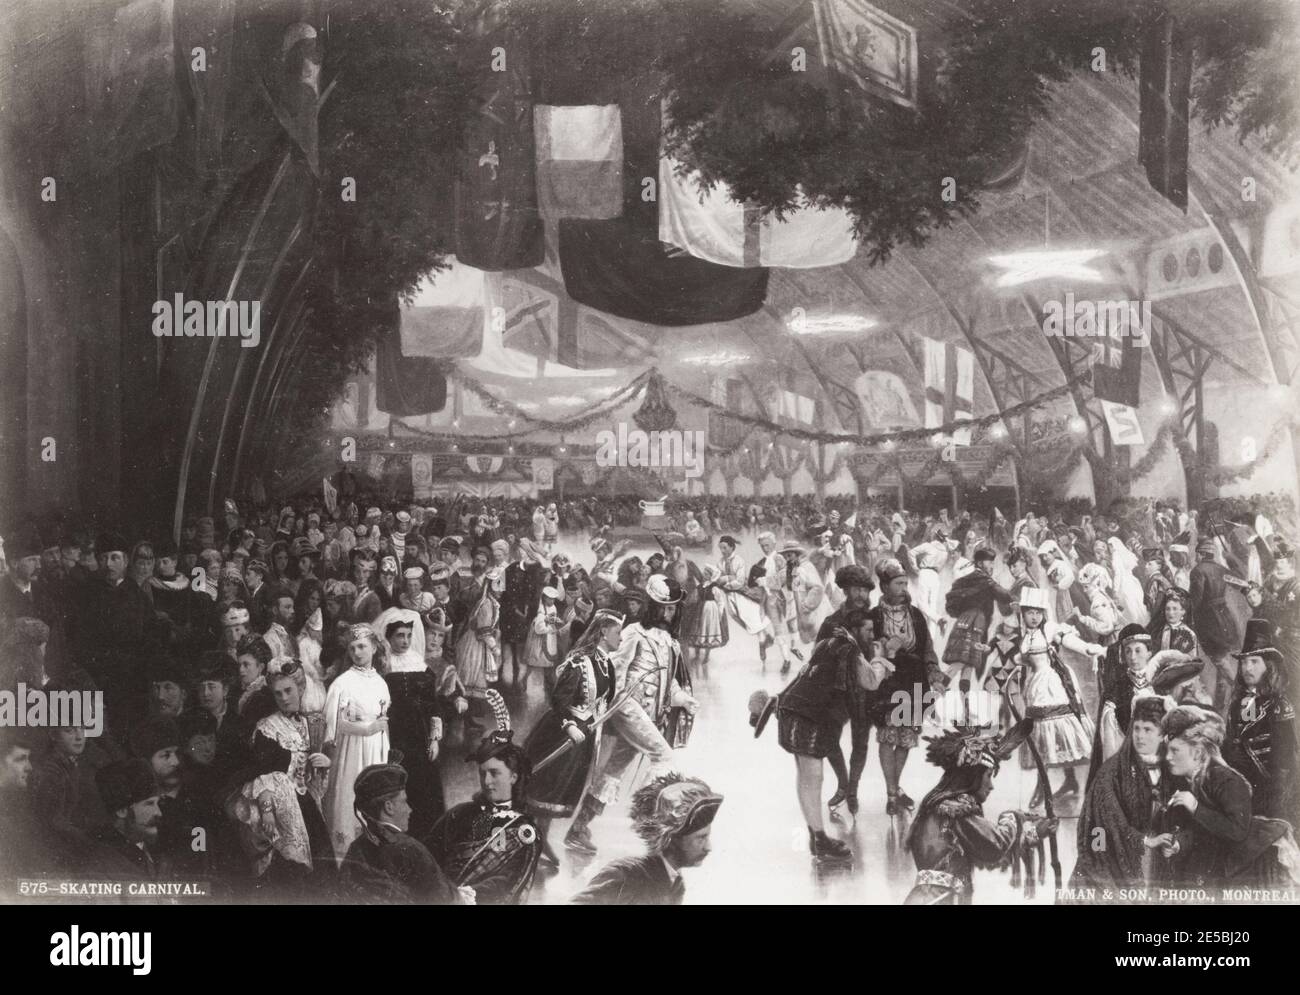 c.1900 vintage photograph: skating carnival photo composition by the William Notman studio, Canada. Stock Photo